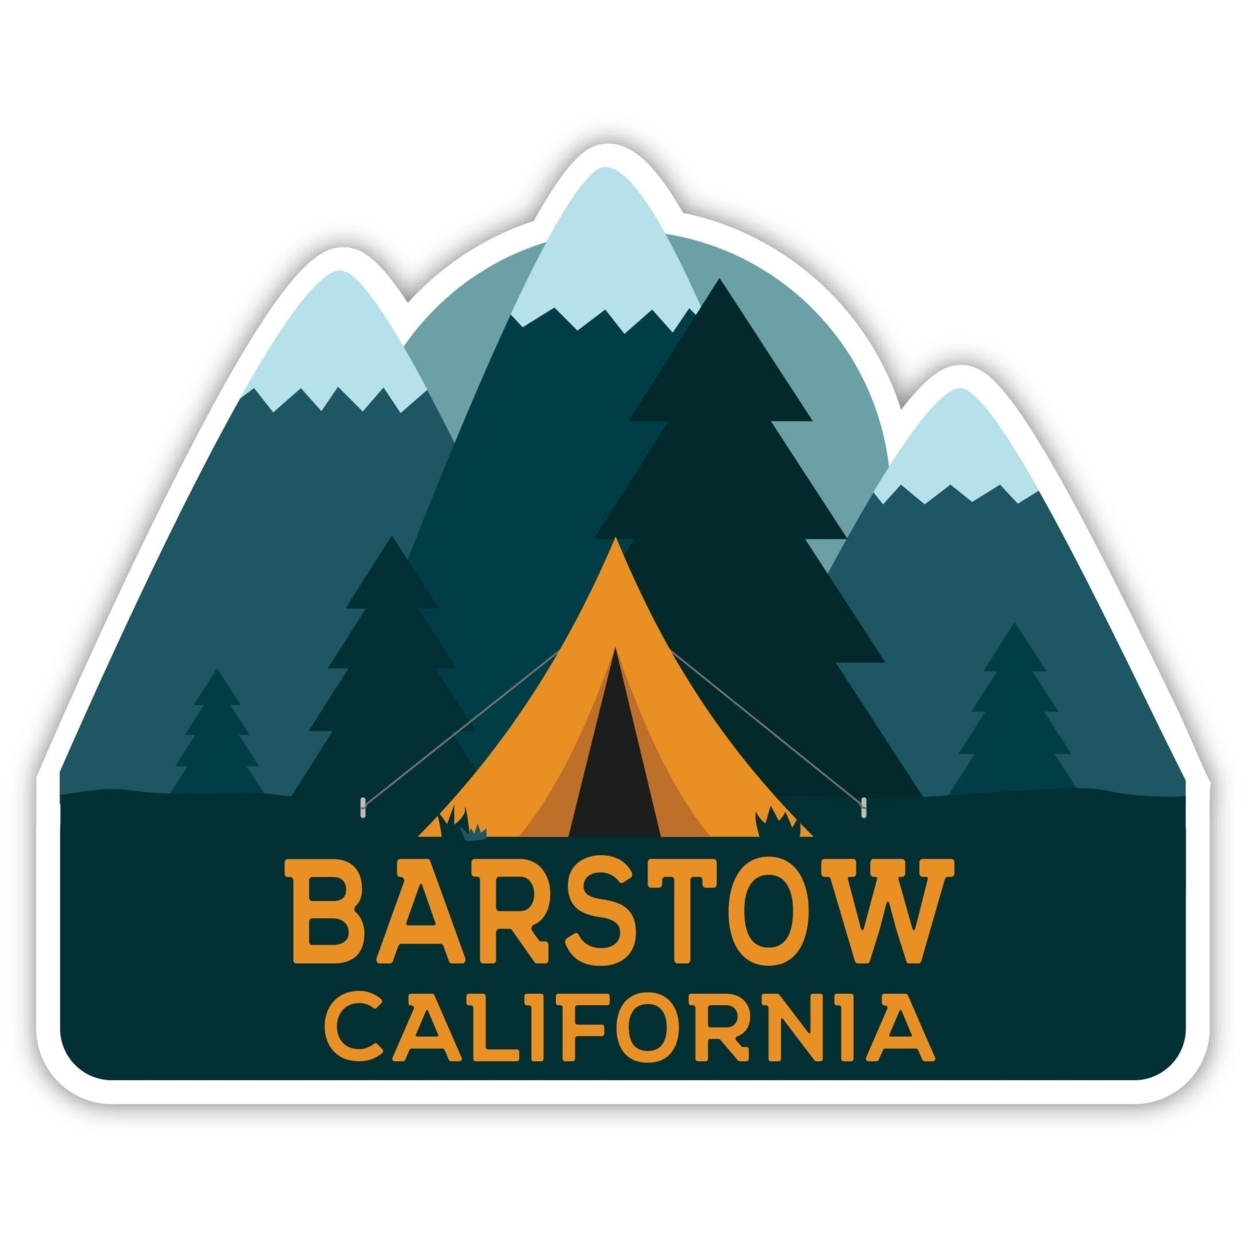 Barstow California Souvenir Decorative Stickers (Choose Theme And Size) - 4-Pack, 2-Inch, Adventures Awaits